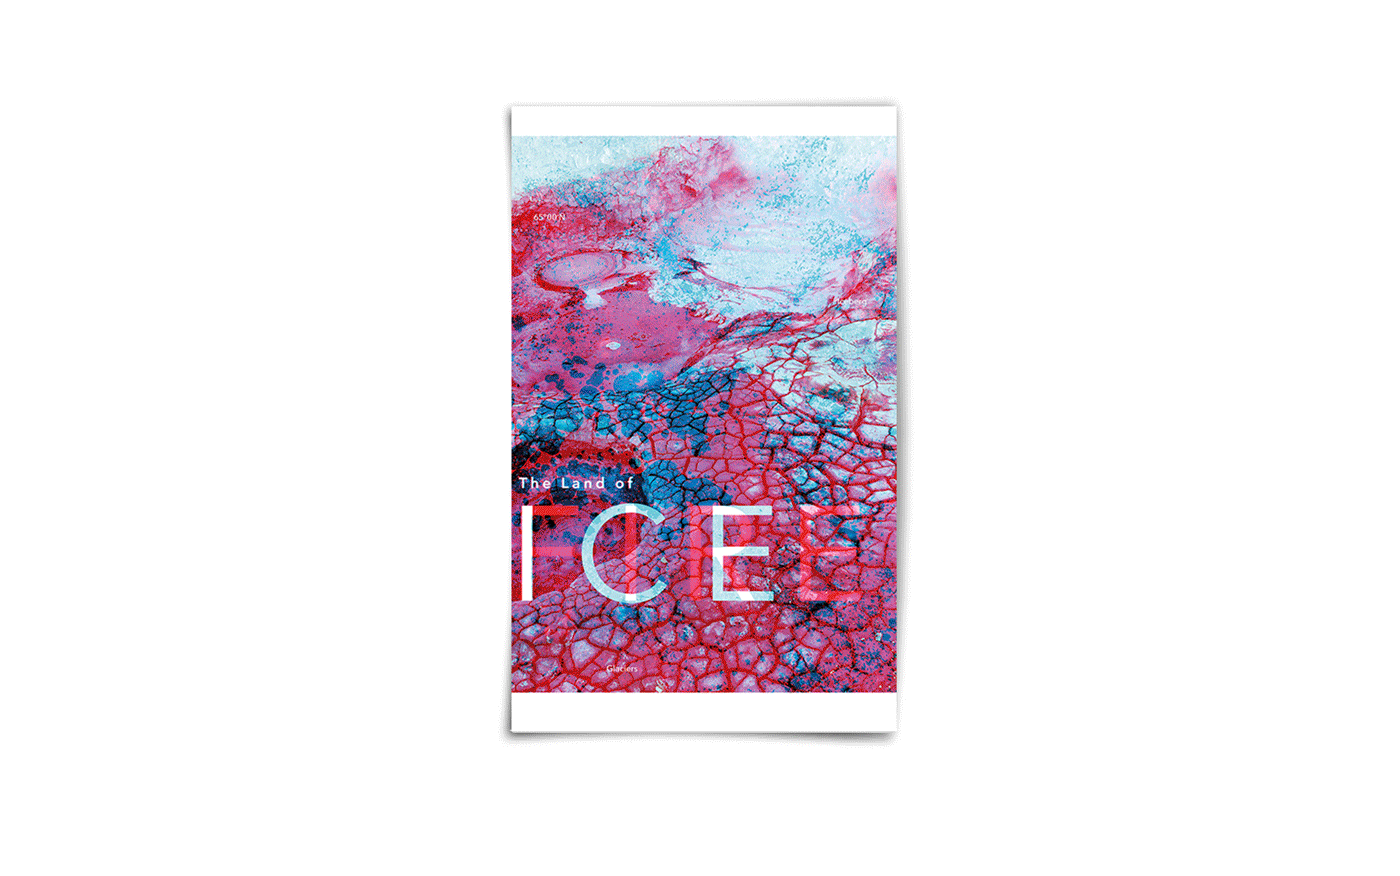 iceland The_Land_of_Fire The_Land_of_Ice 3D red cyan mini-brochure desolate limitless Nature ice fire Island The_Interchanging_Island Put_Me_in_the_Freezer